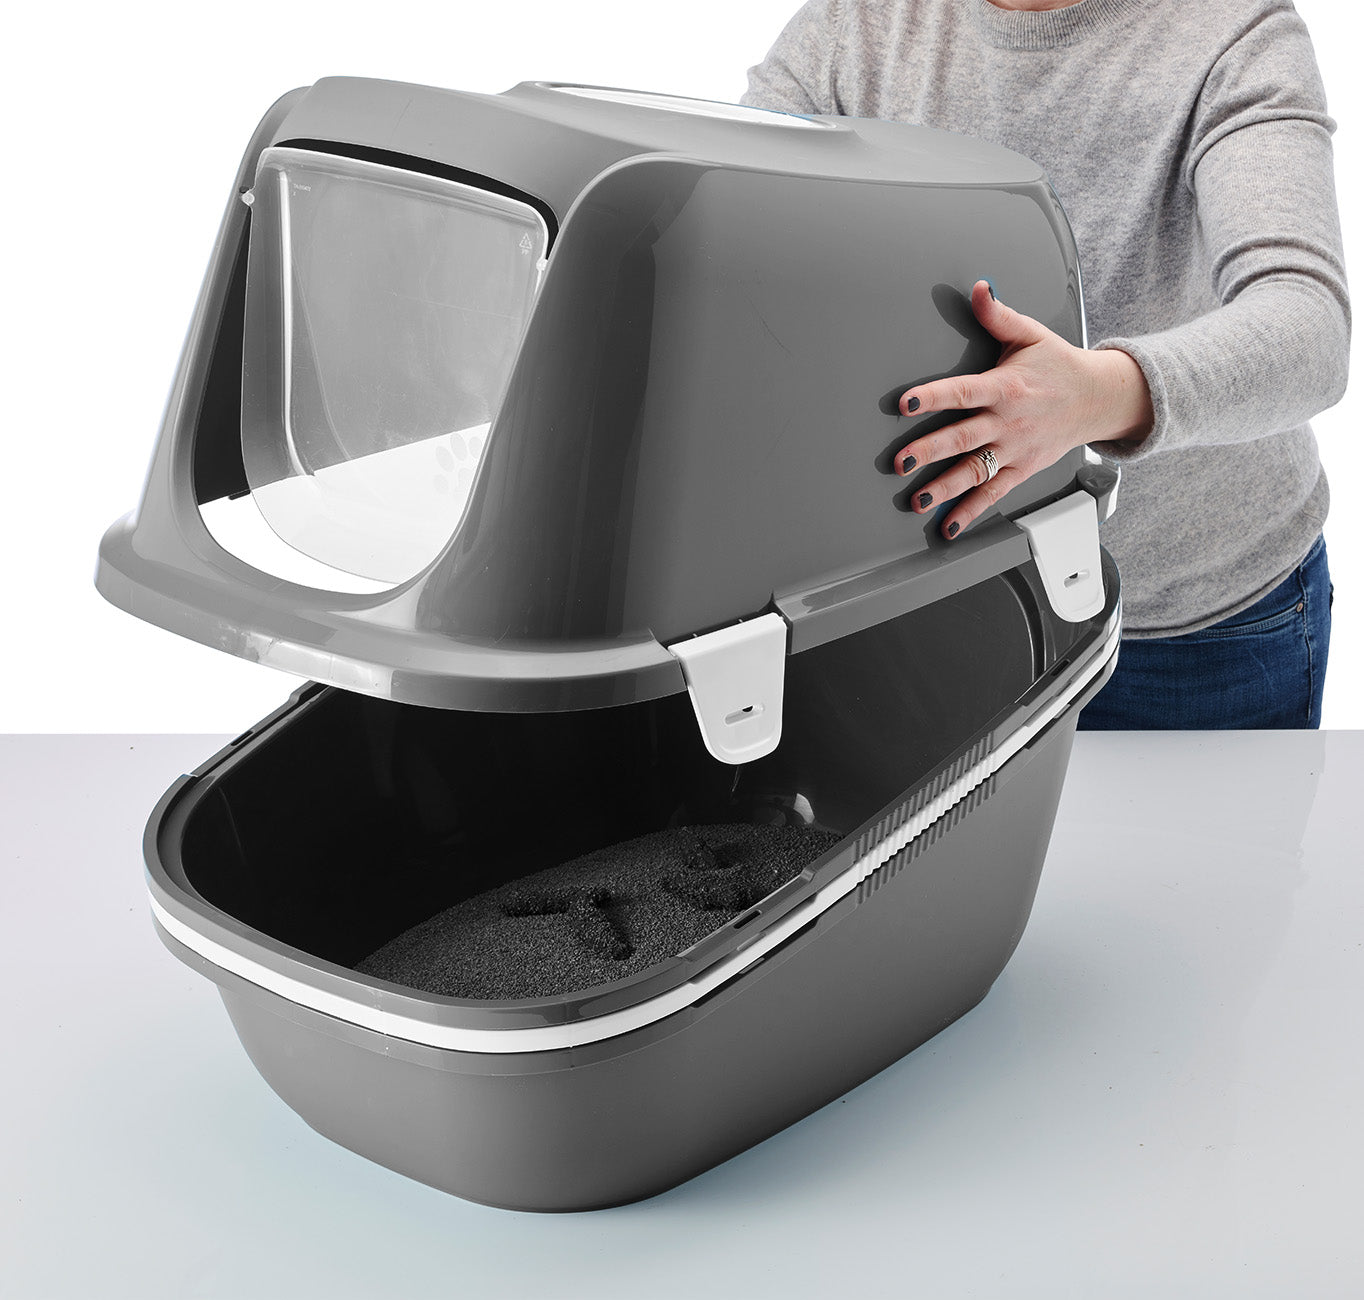 Lux | Hooded litter box with carbon filter for odour control